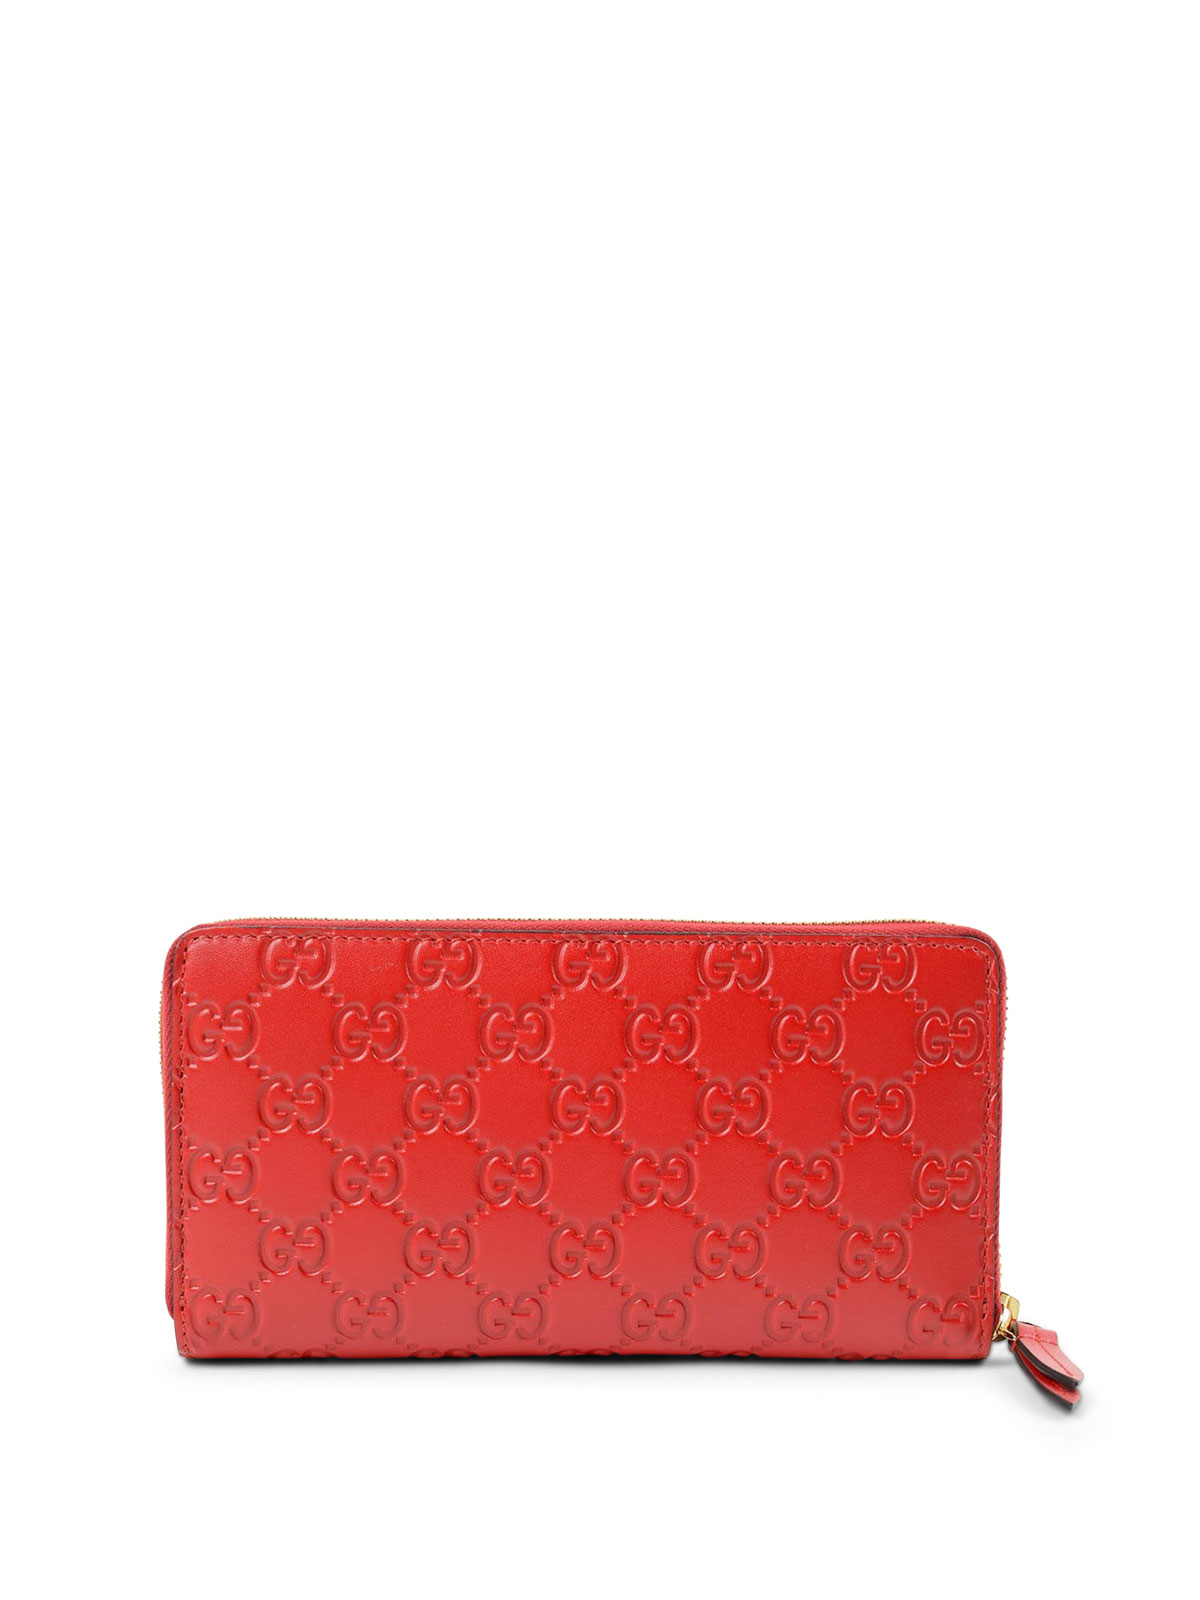 red gucci signature wallet